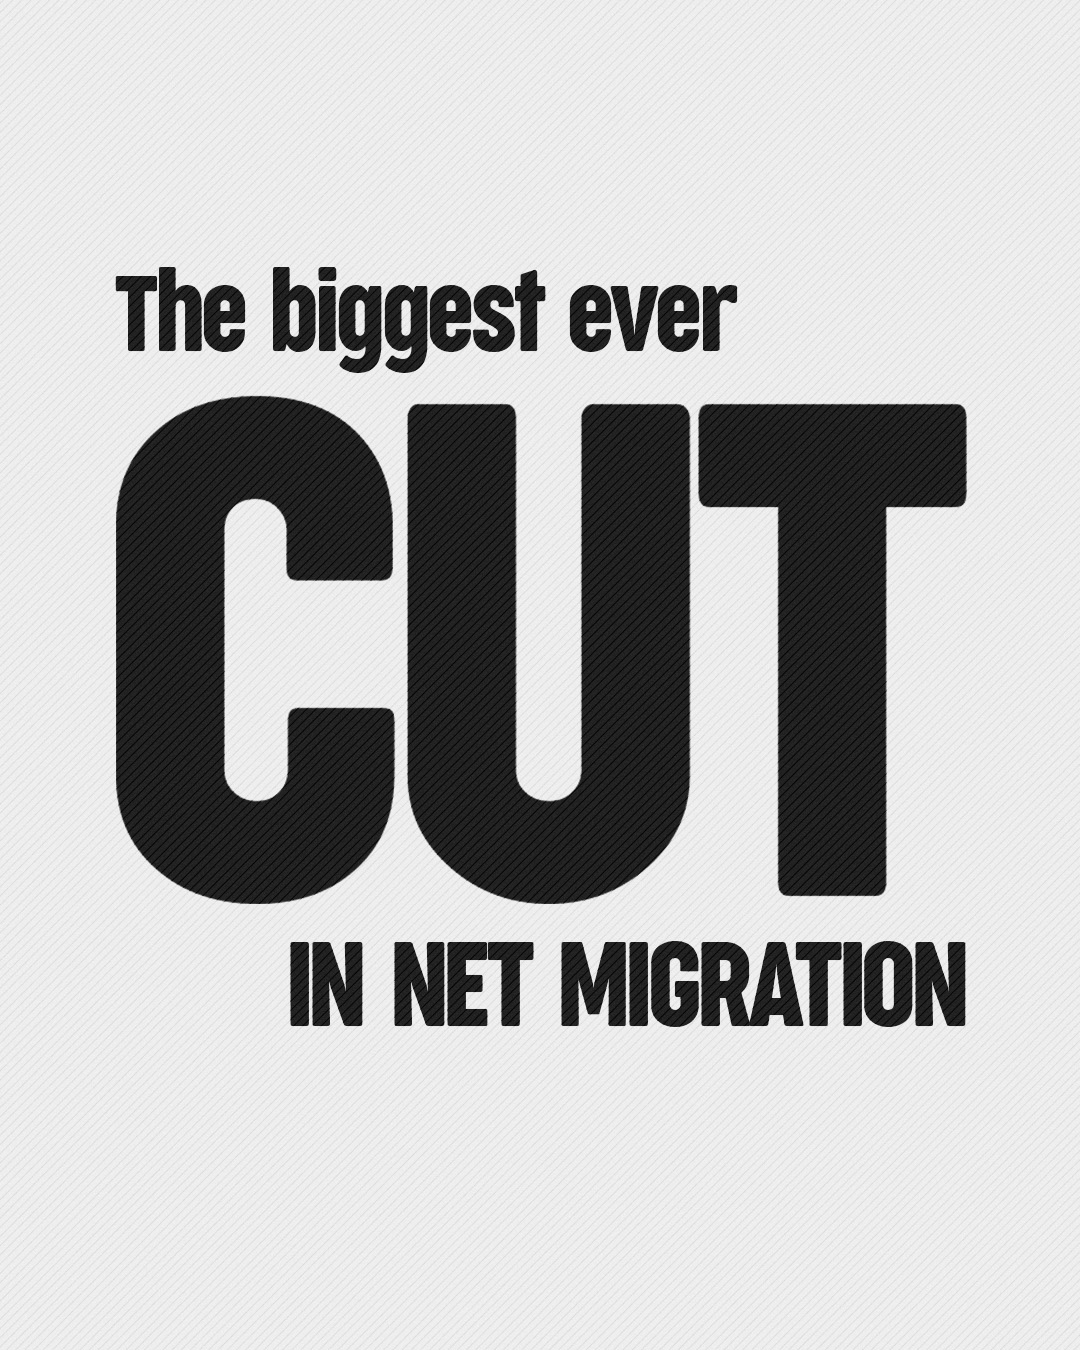 The biggest ever cut in net migration